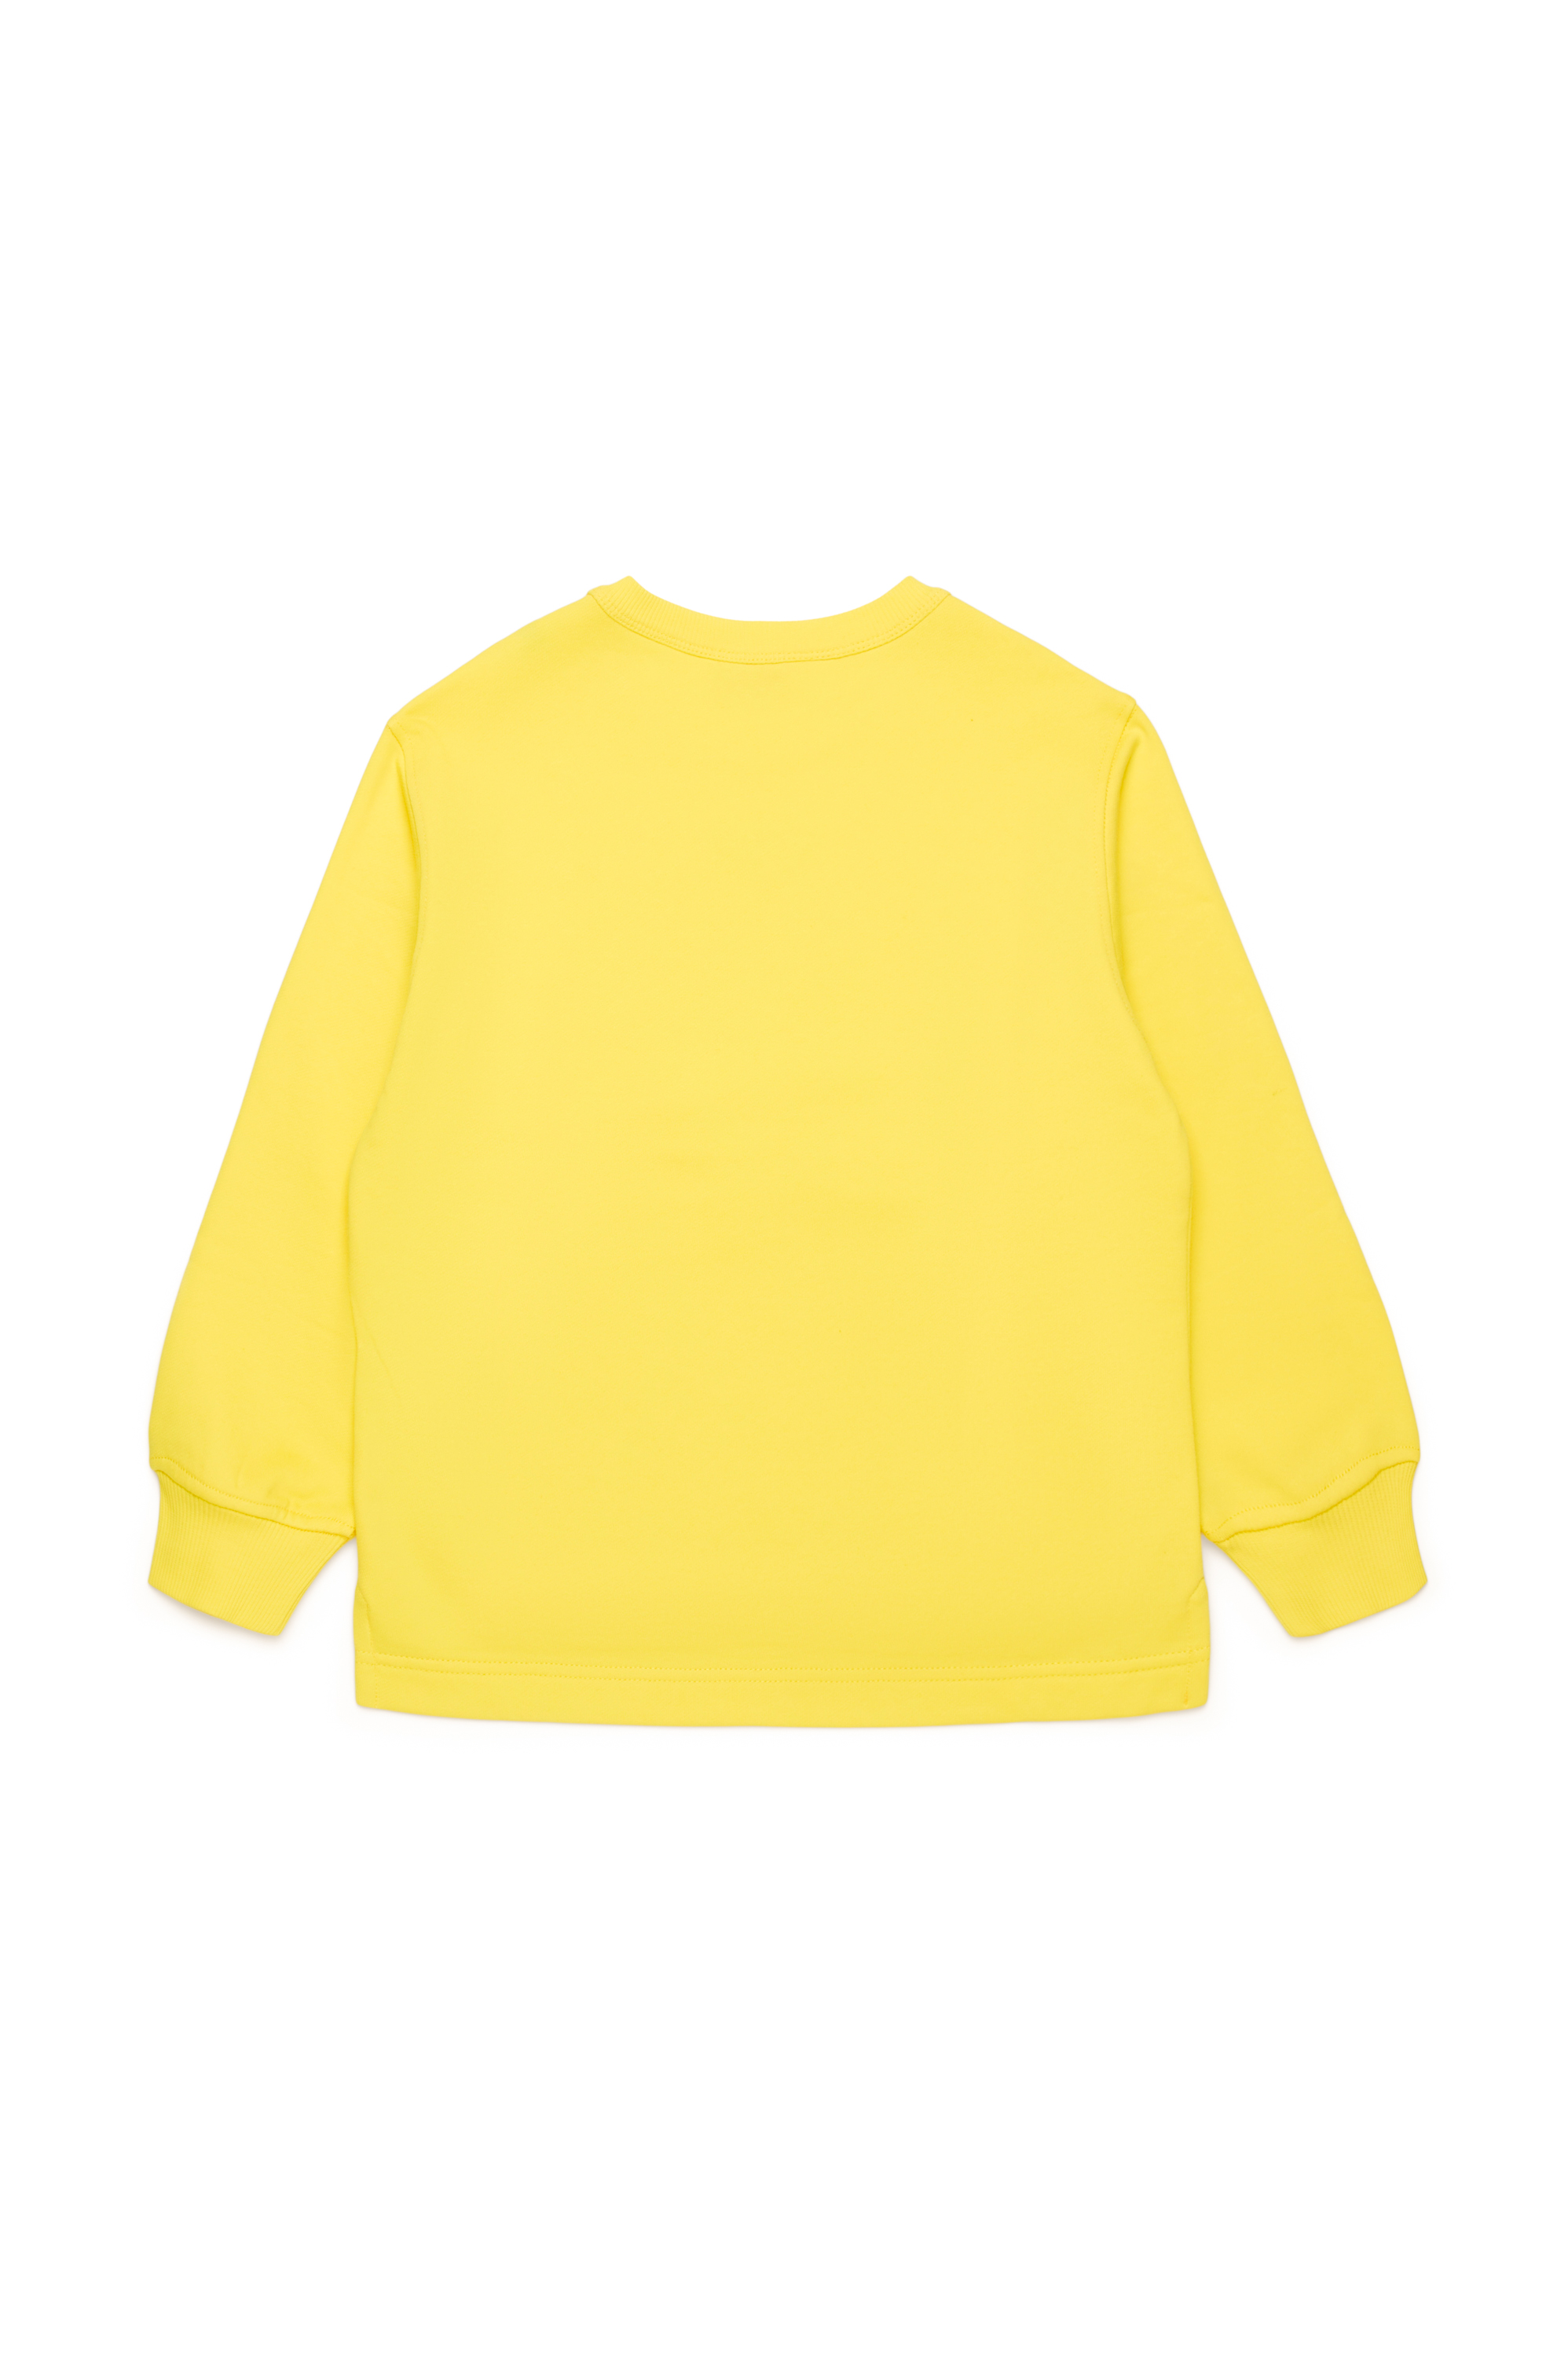 SMACSISOD OVER, Yellow